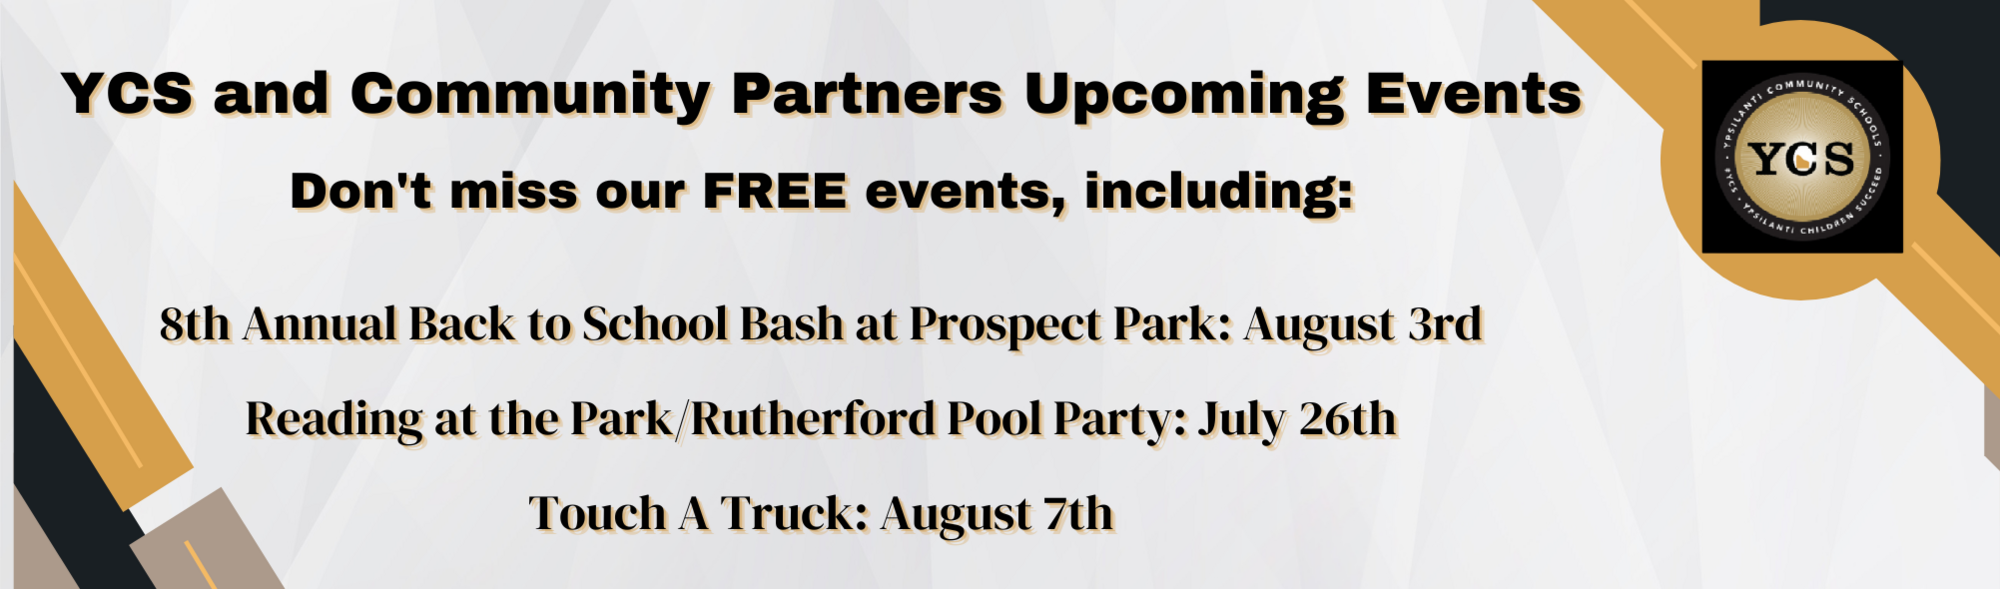 YCS and Community Partners Upcoming Events Don't miss our FREE events, including: •	8th Annual Back to School Bash at Prospect Park: August 3rd •	Reading at the Park/Rutherford Pool Party:  July 26th •Touch A Truck:  August 7th and YCS Logo